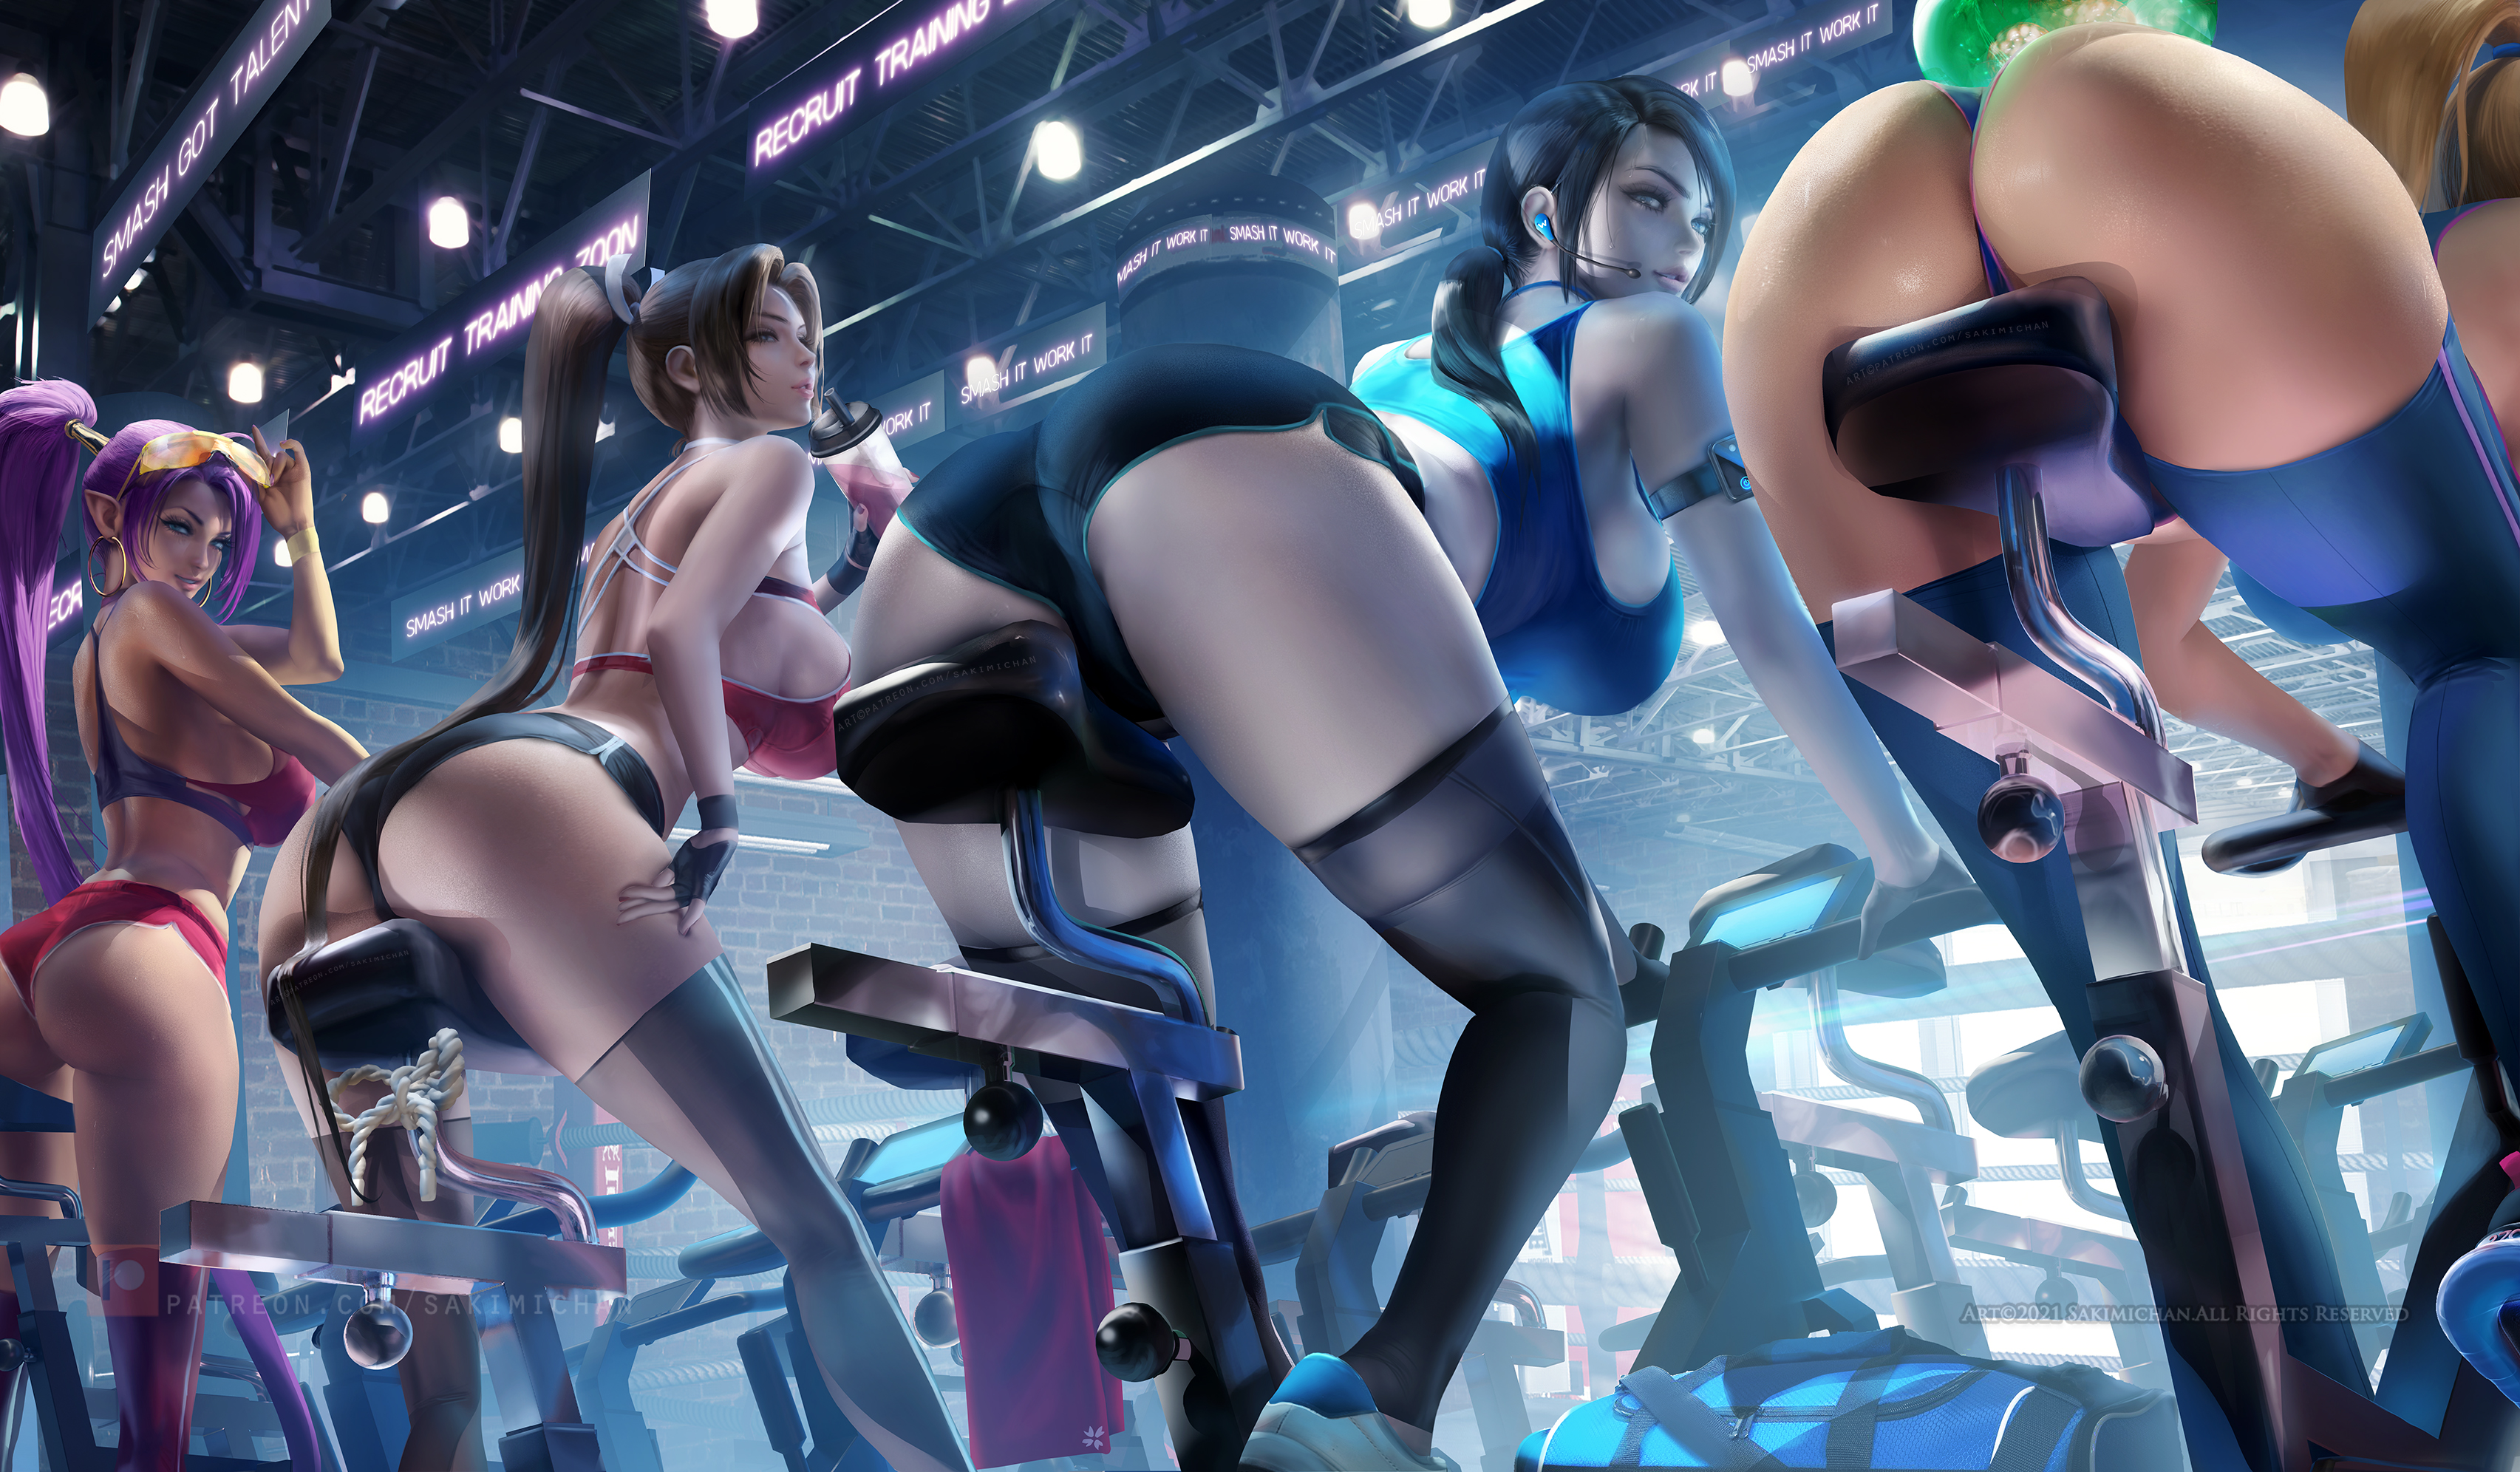 General 3410x1992 video game girls video game characters ass artwork drawing digital art illustration fan art Sakimichan crossover Shantae Samus Aran Wii King of Fighters Metroid Wii Fit Trainer Mai Shiranui ponytail group of asses short tops short shorts high waisted shorts thigh-highs sportswear sport gyms